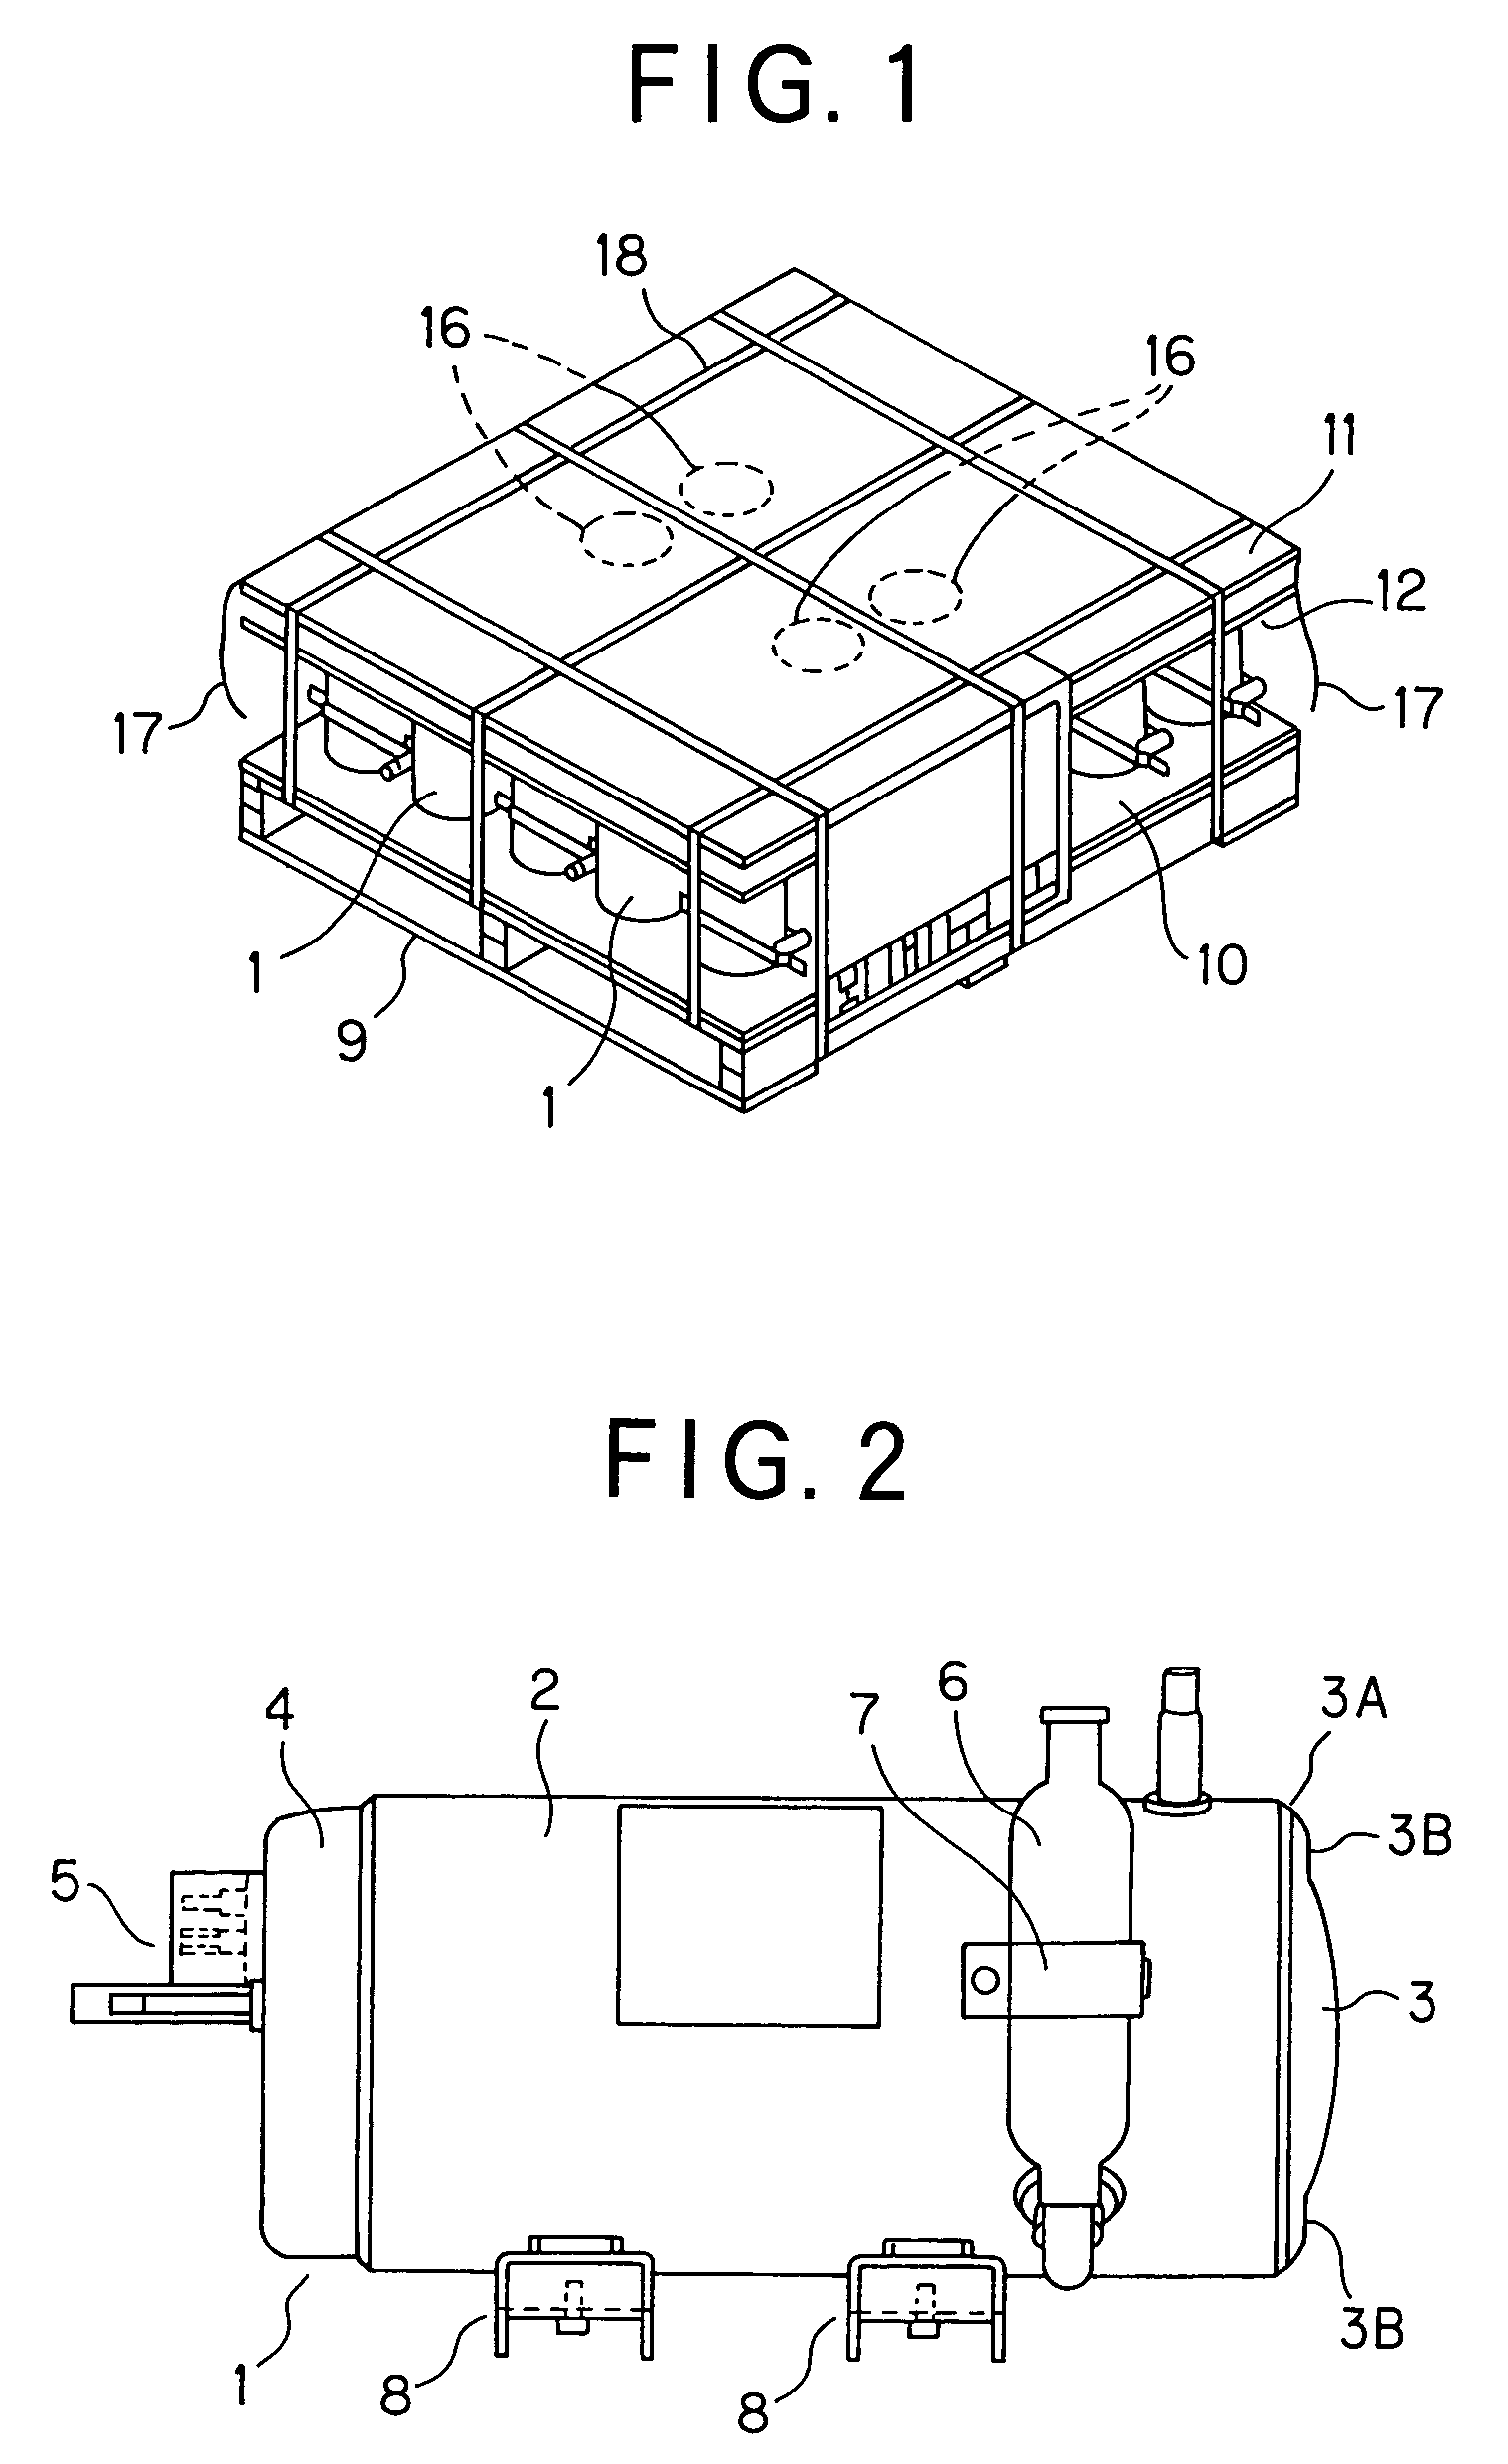 Packaging apparatus and method for compressor